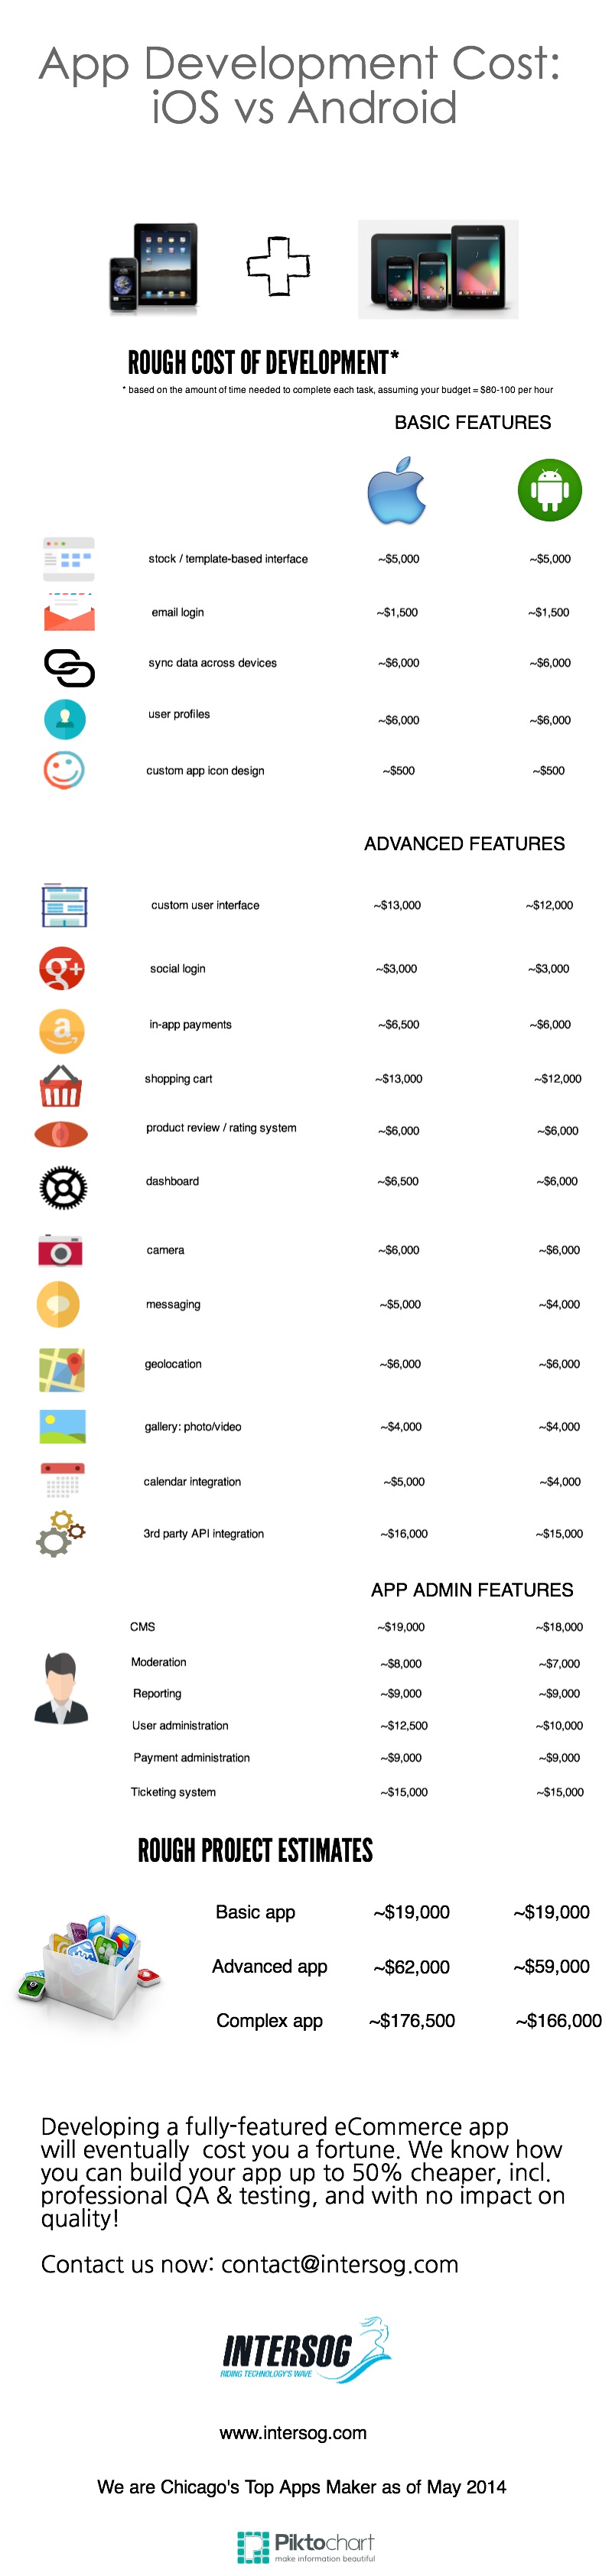 App Development Cost in 2014: iOS vs Android